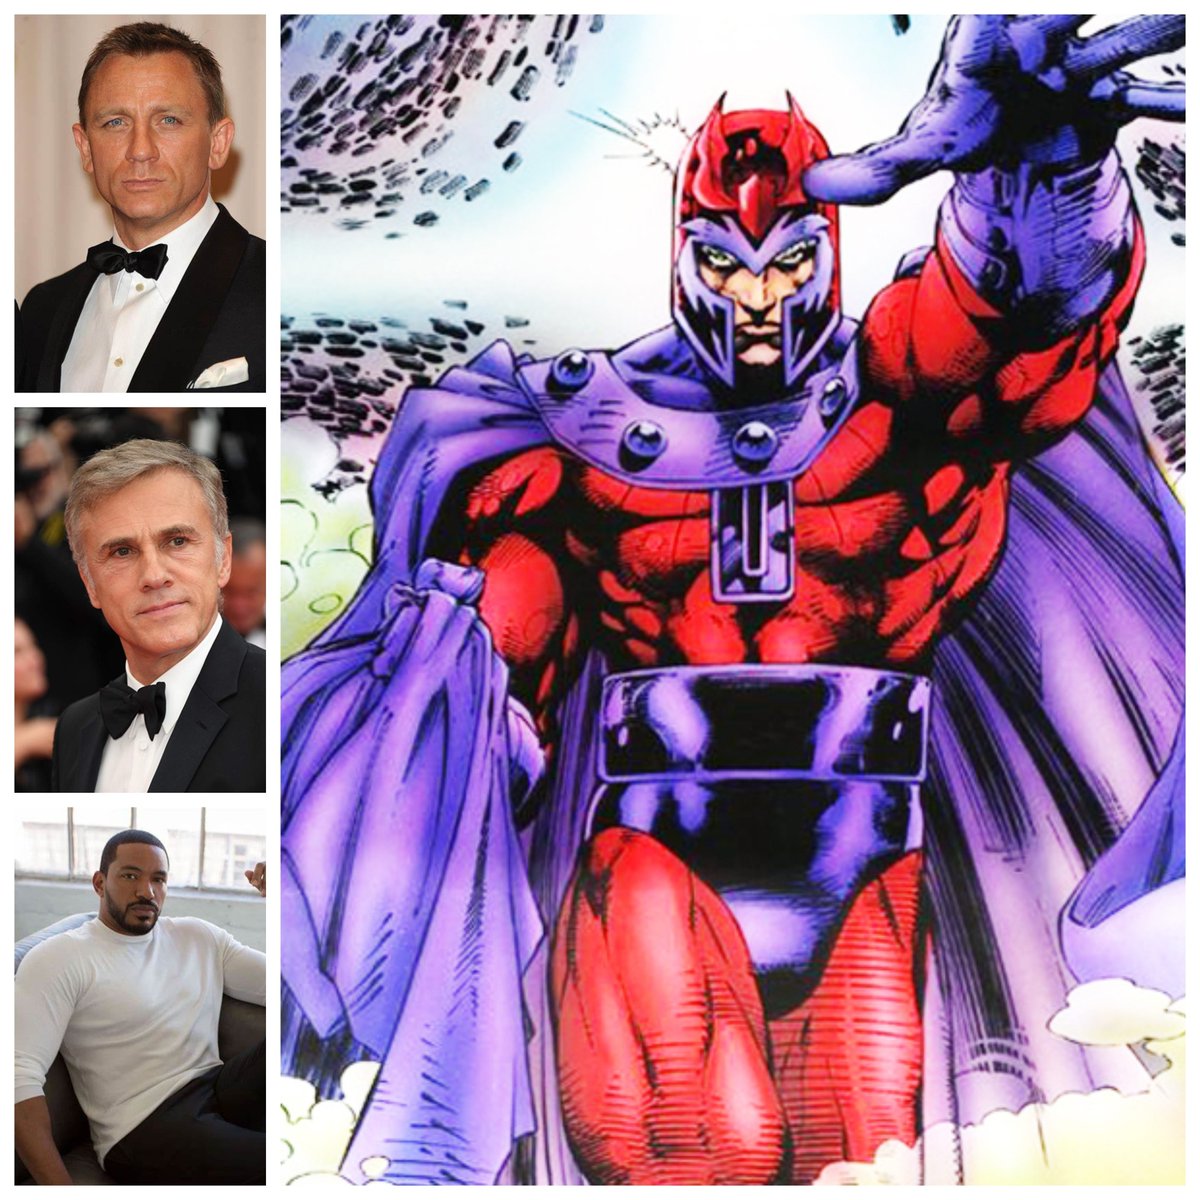 I nominated #MarkStrong, #RalphFiennes or @David_oyelowoo1 as #CharlesXavier/#ProfessorX and #DanielCraig, #ChristophWaltz or @lazofficial as #ErikLehnsherr/#Magneto in #XMen for the #MarvelCinematicUniverse.